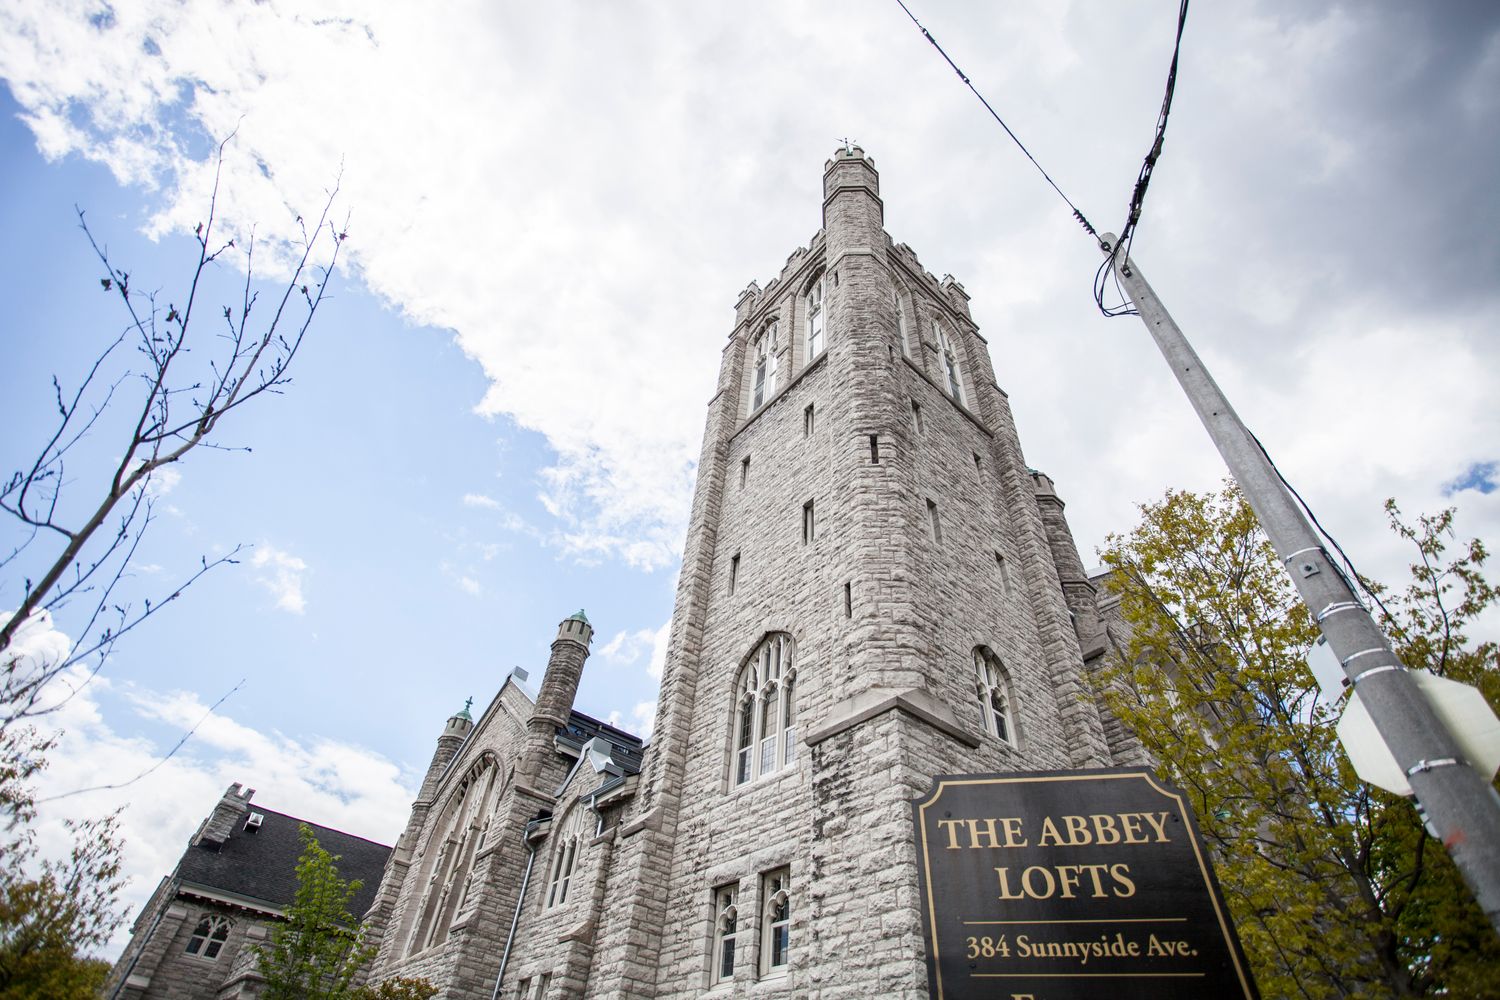 384 Sunnyside Avenue. The Abbey Lofts is located in  West End, Toronto - image #2 of 5